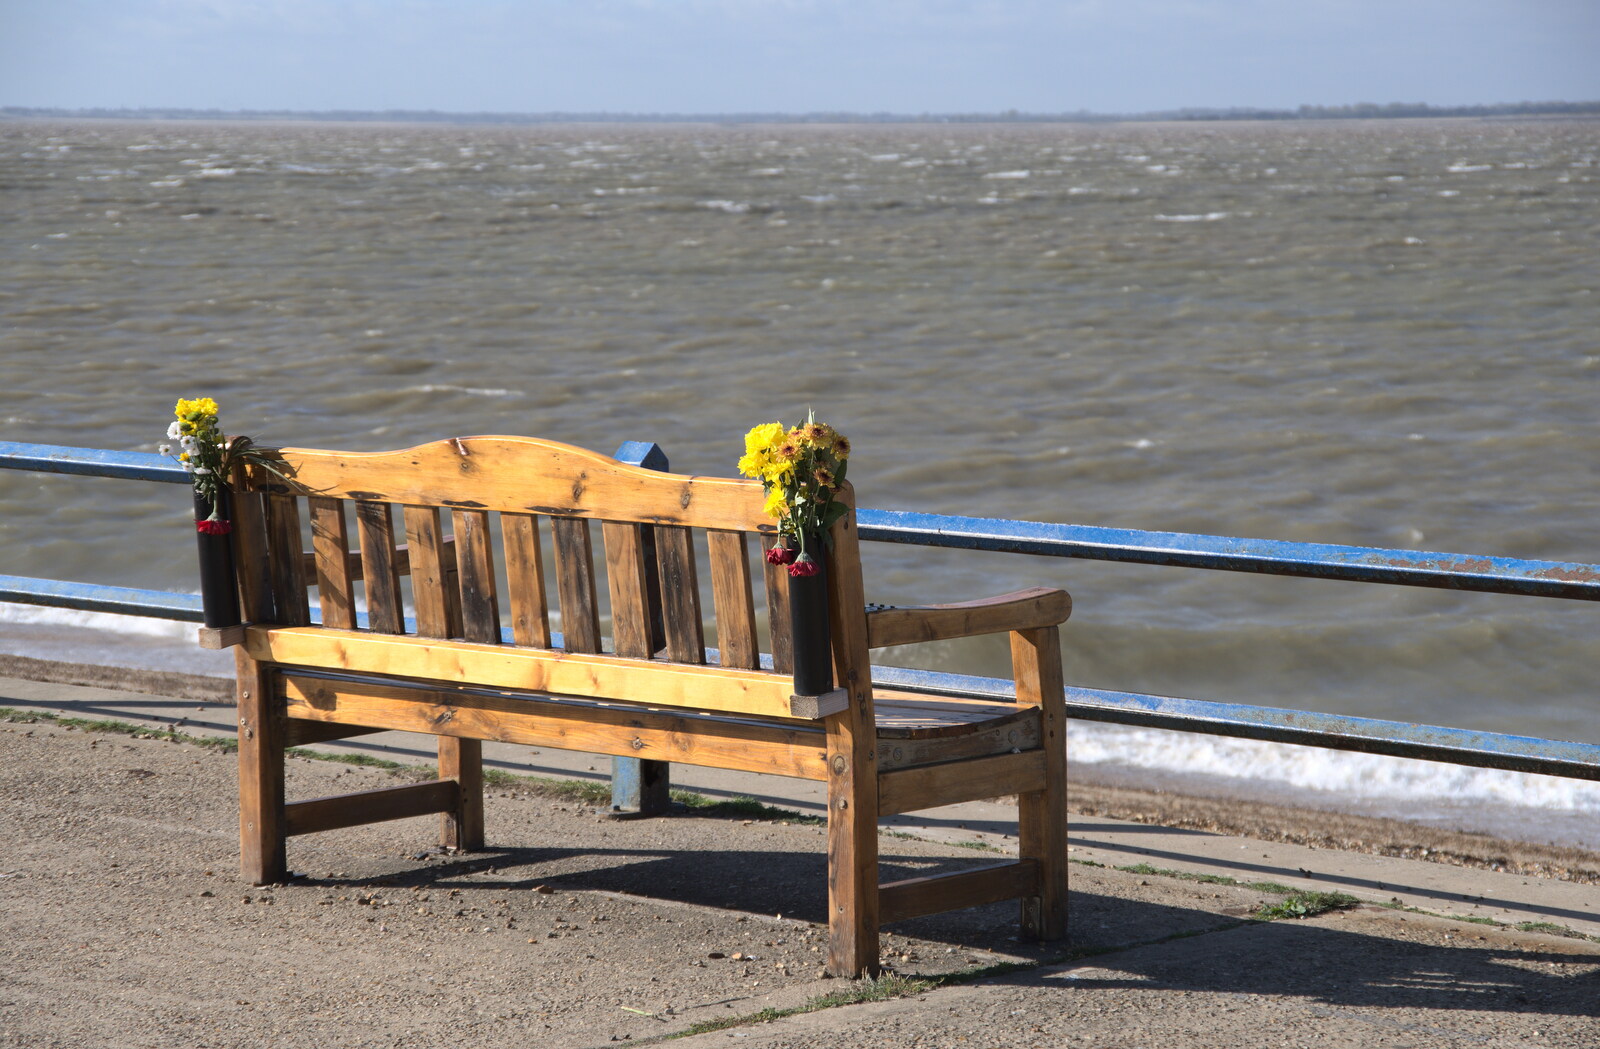 A Postcard from Felixstowe, Suffolk - 5th October 2022: A bench with some flowers